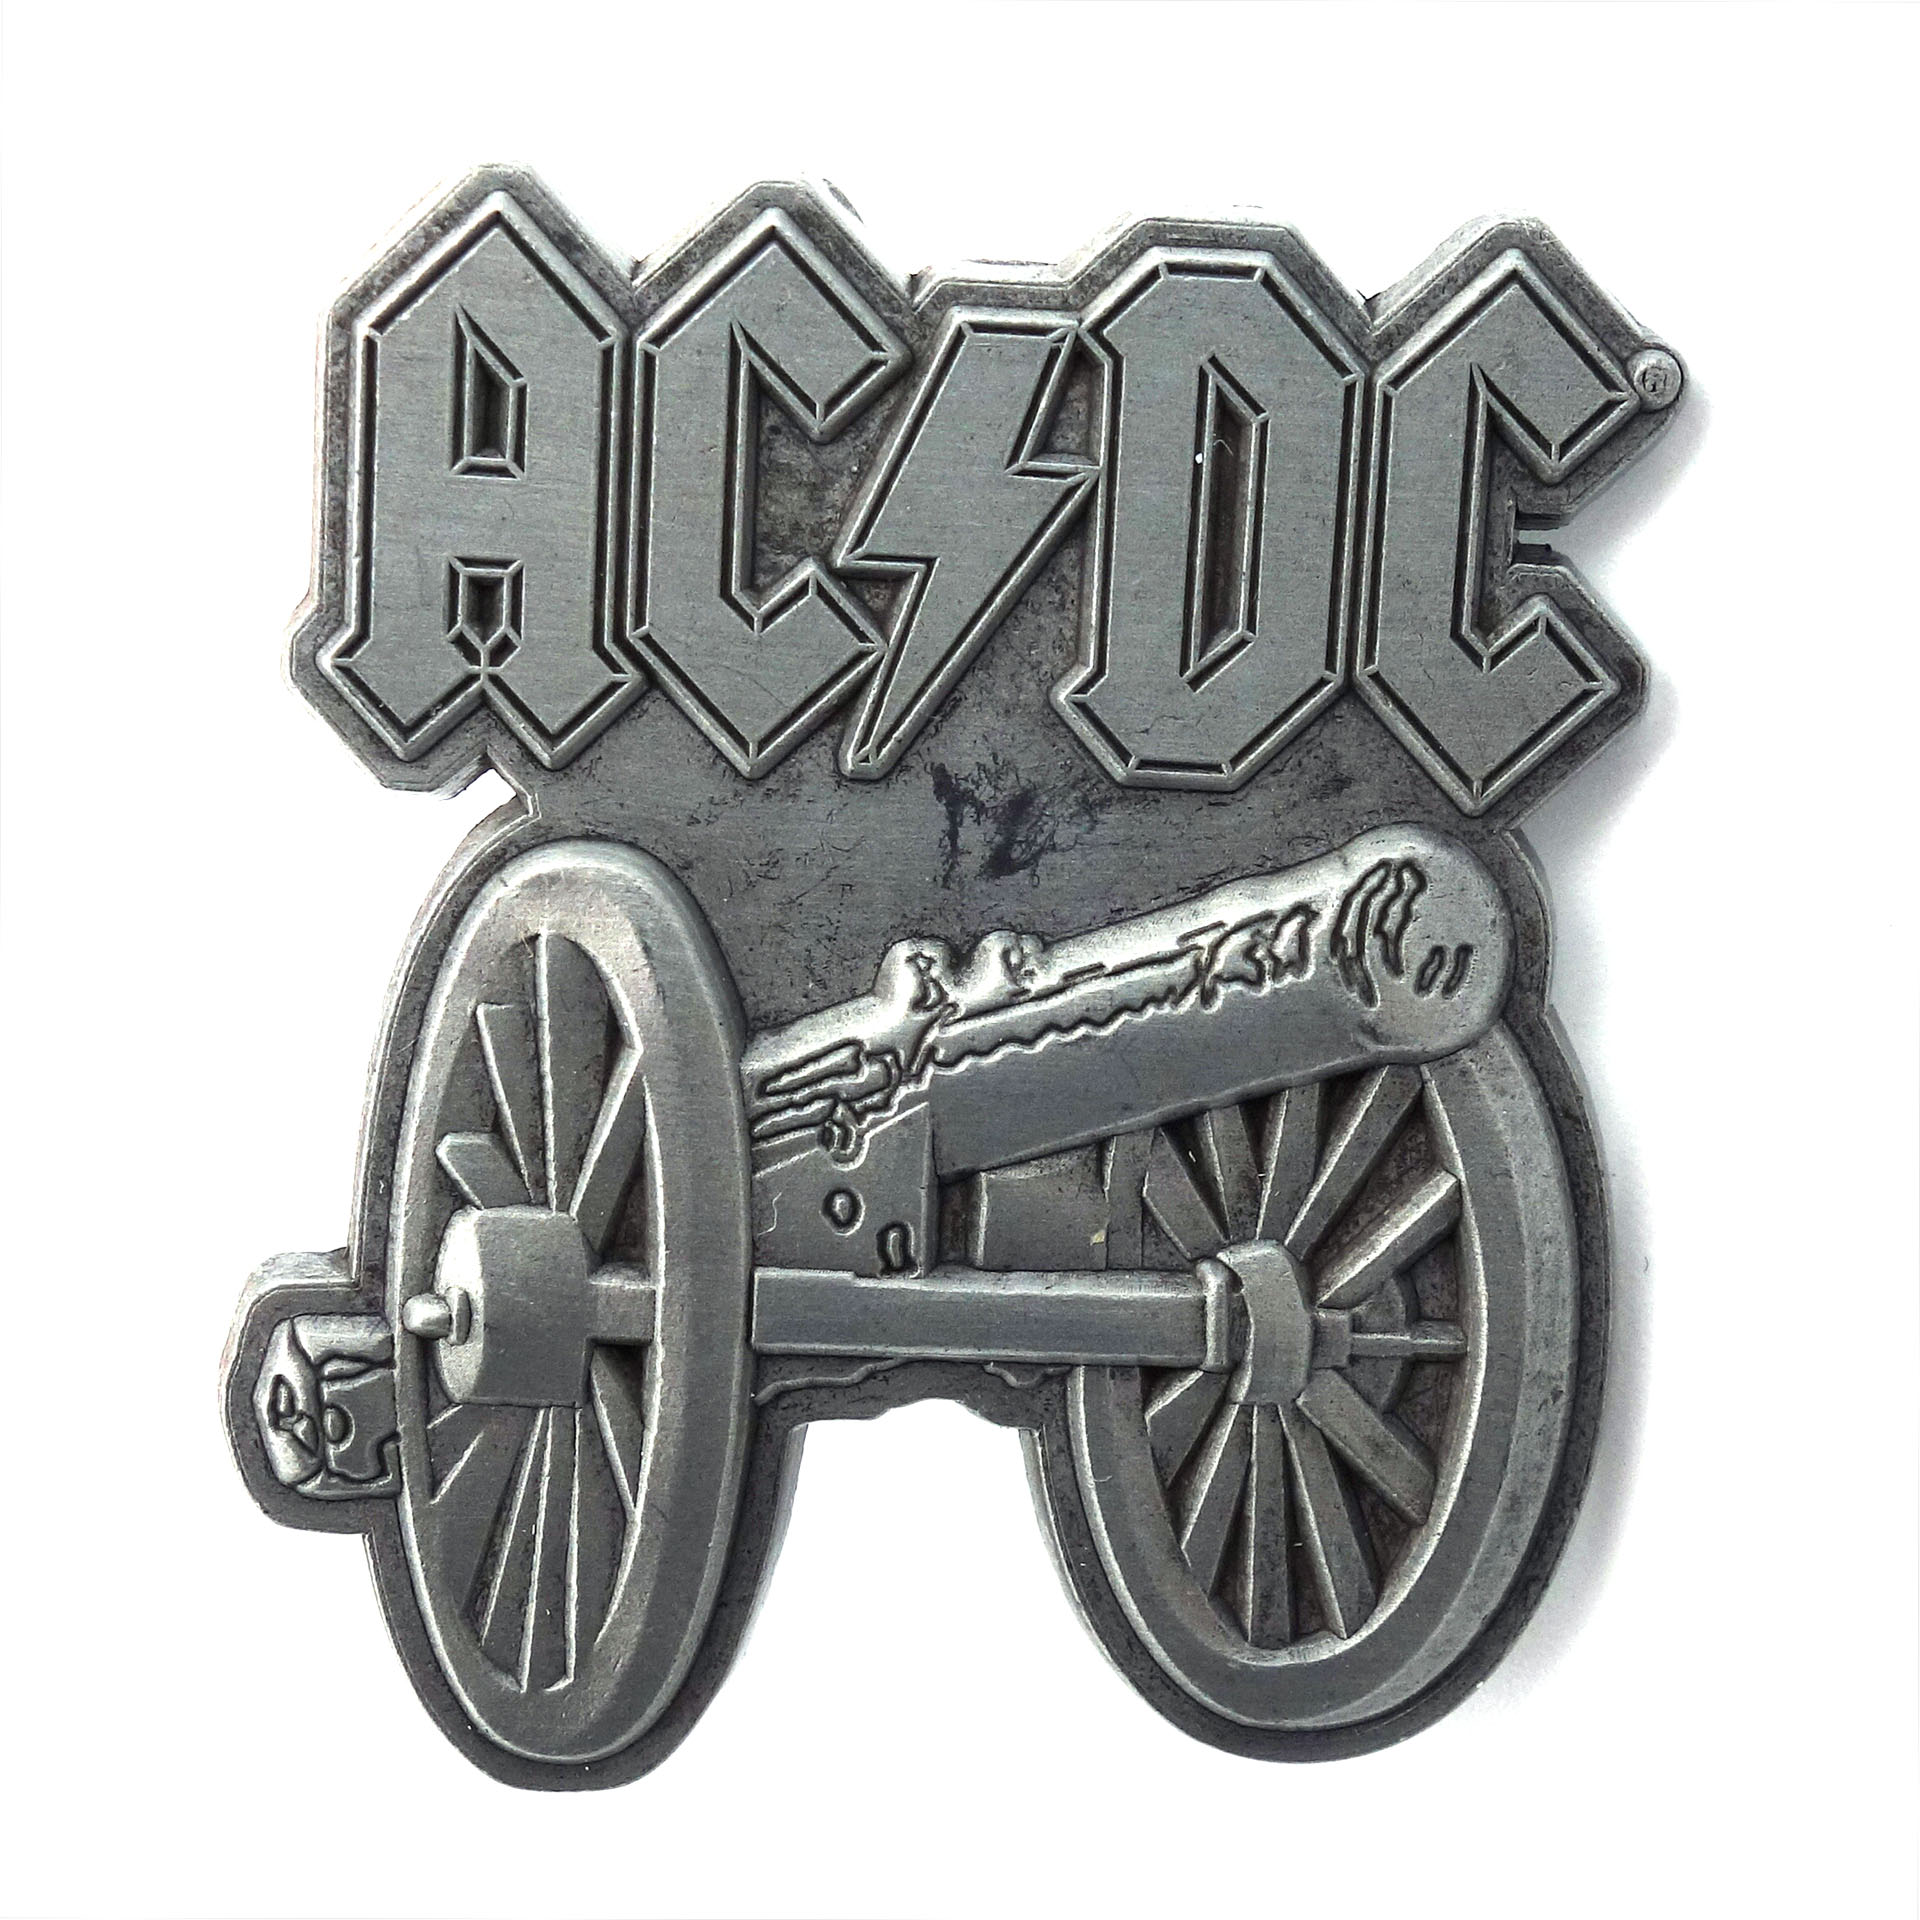 AC/DC Pin "For Those About To Rock We Salute You" Groß